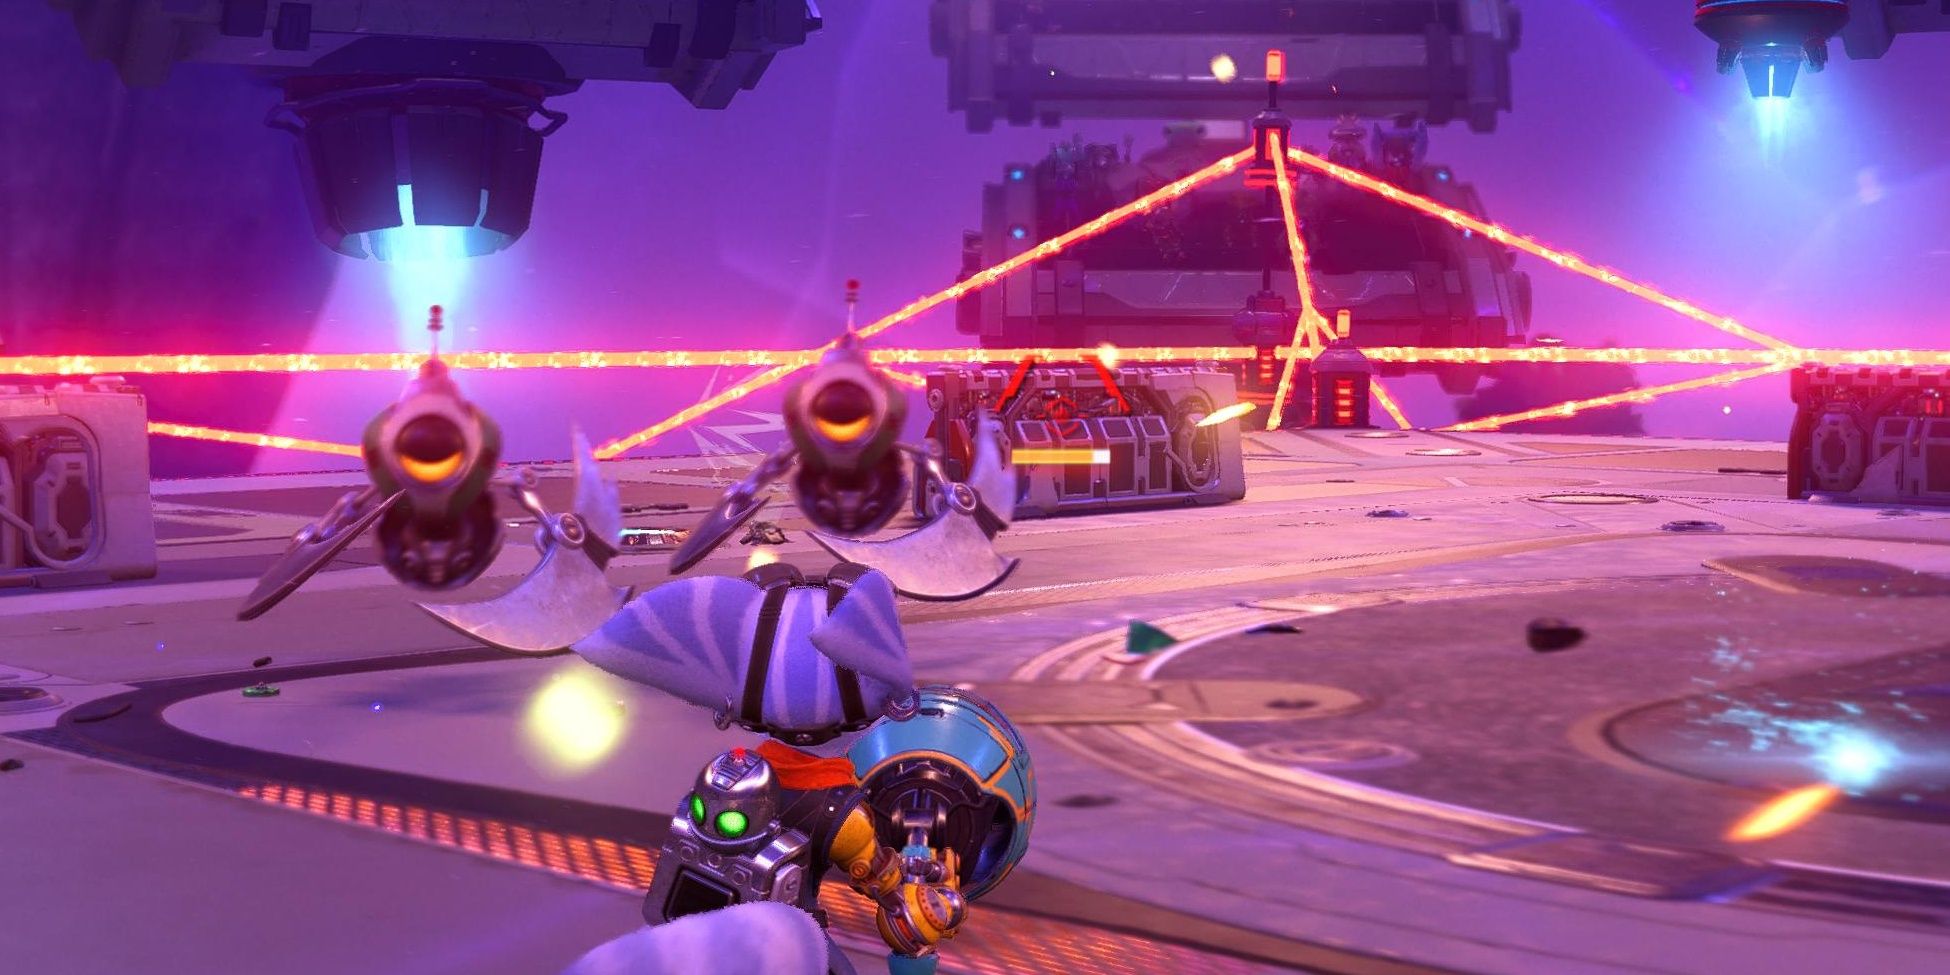 Rivet dodging a series of lasers and enemy fire in the Arena in Ratchet and Clank: Rift Apart